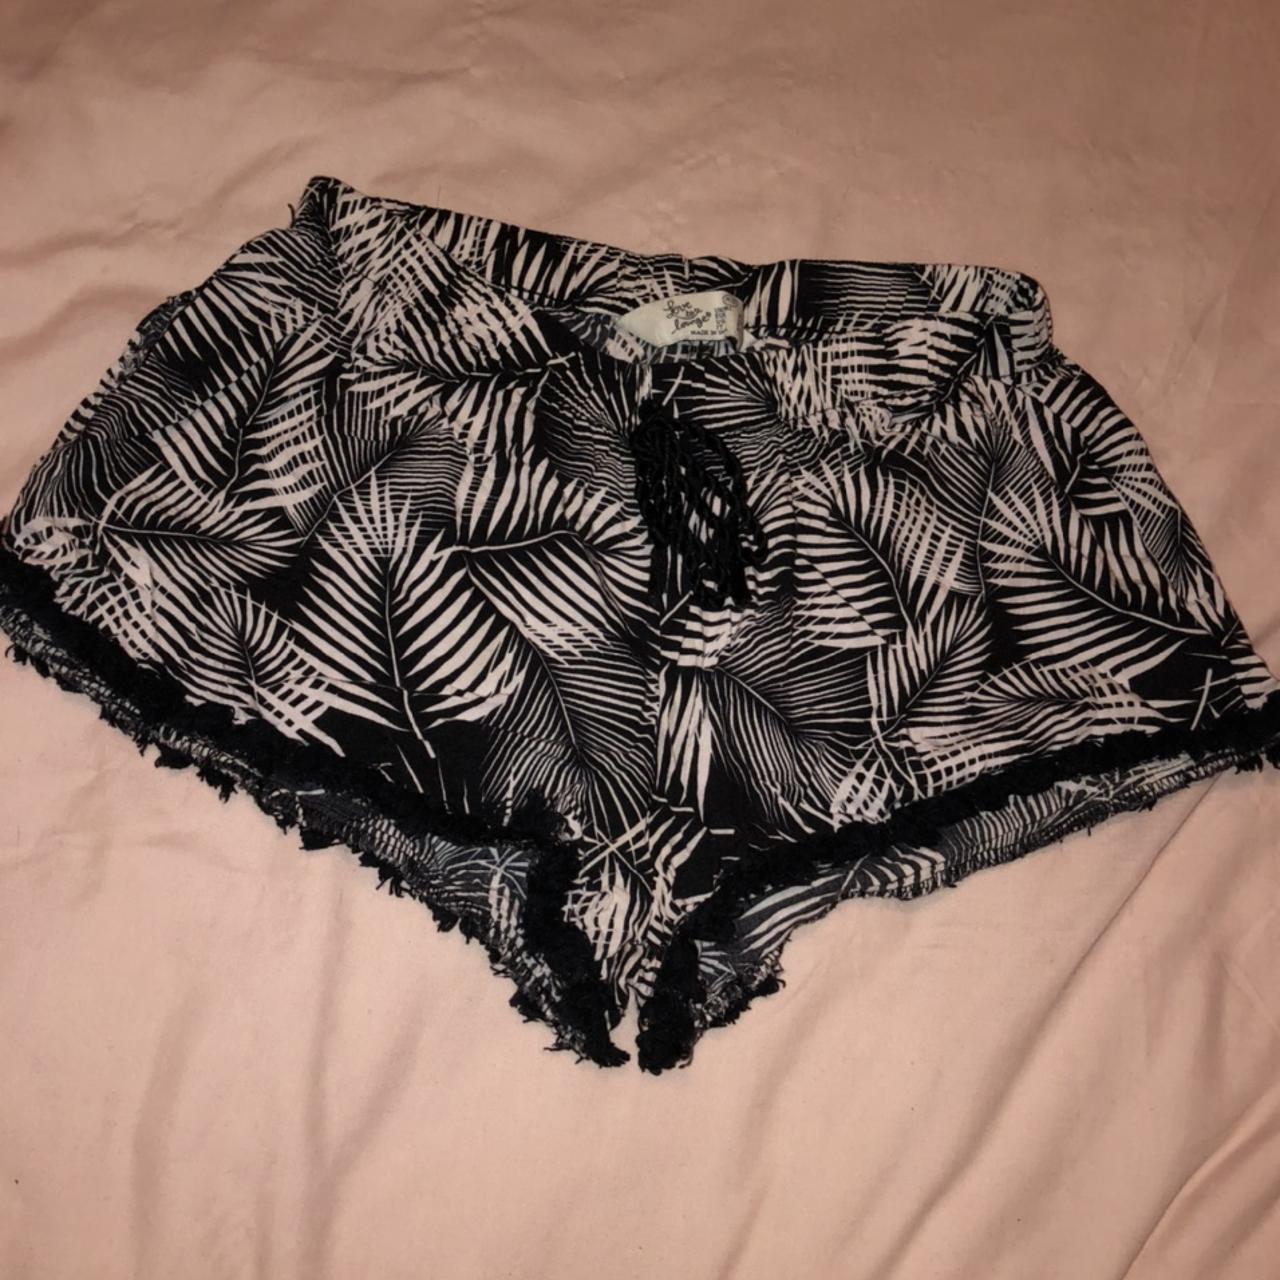 Primark Love To Lounge Shorts🤩 Cute black and white